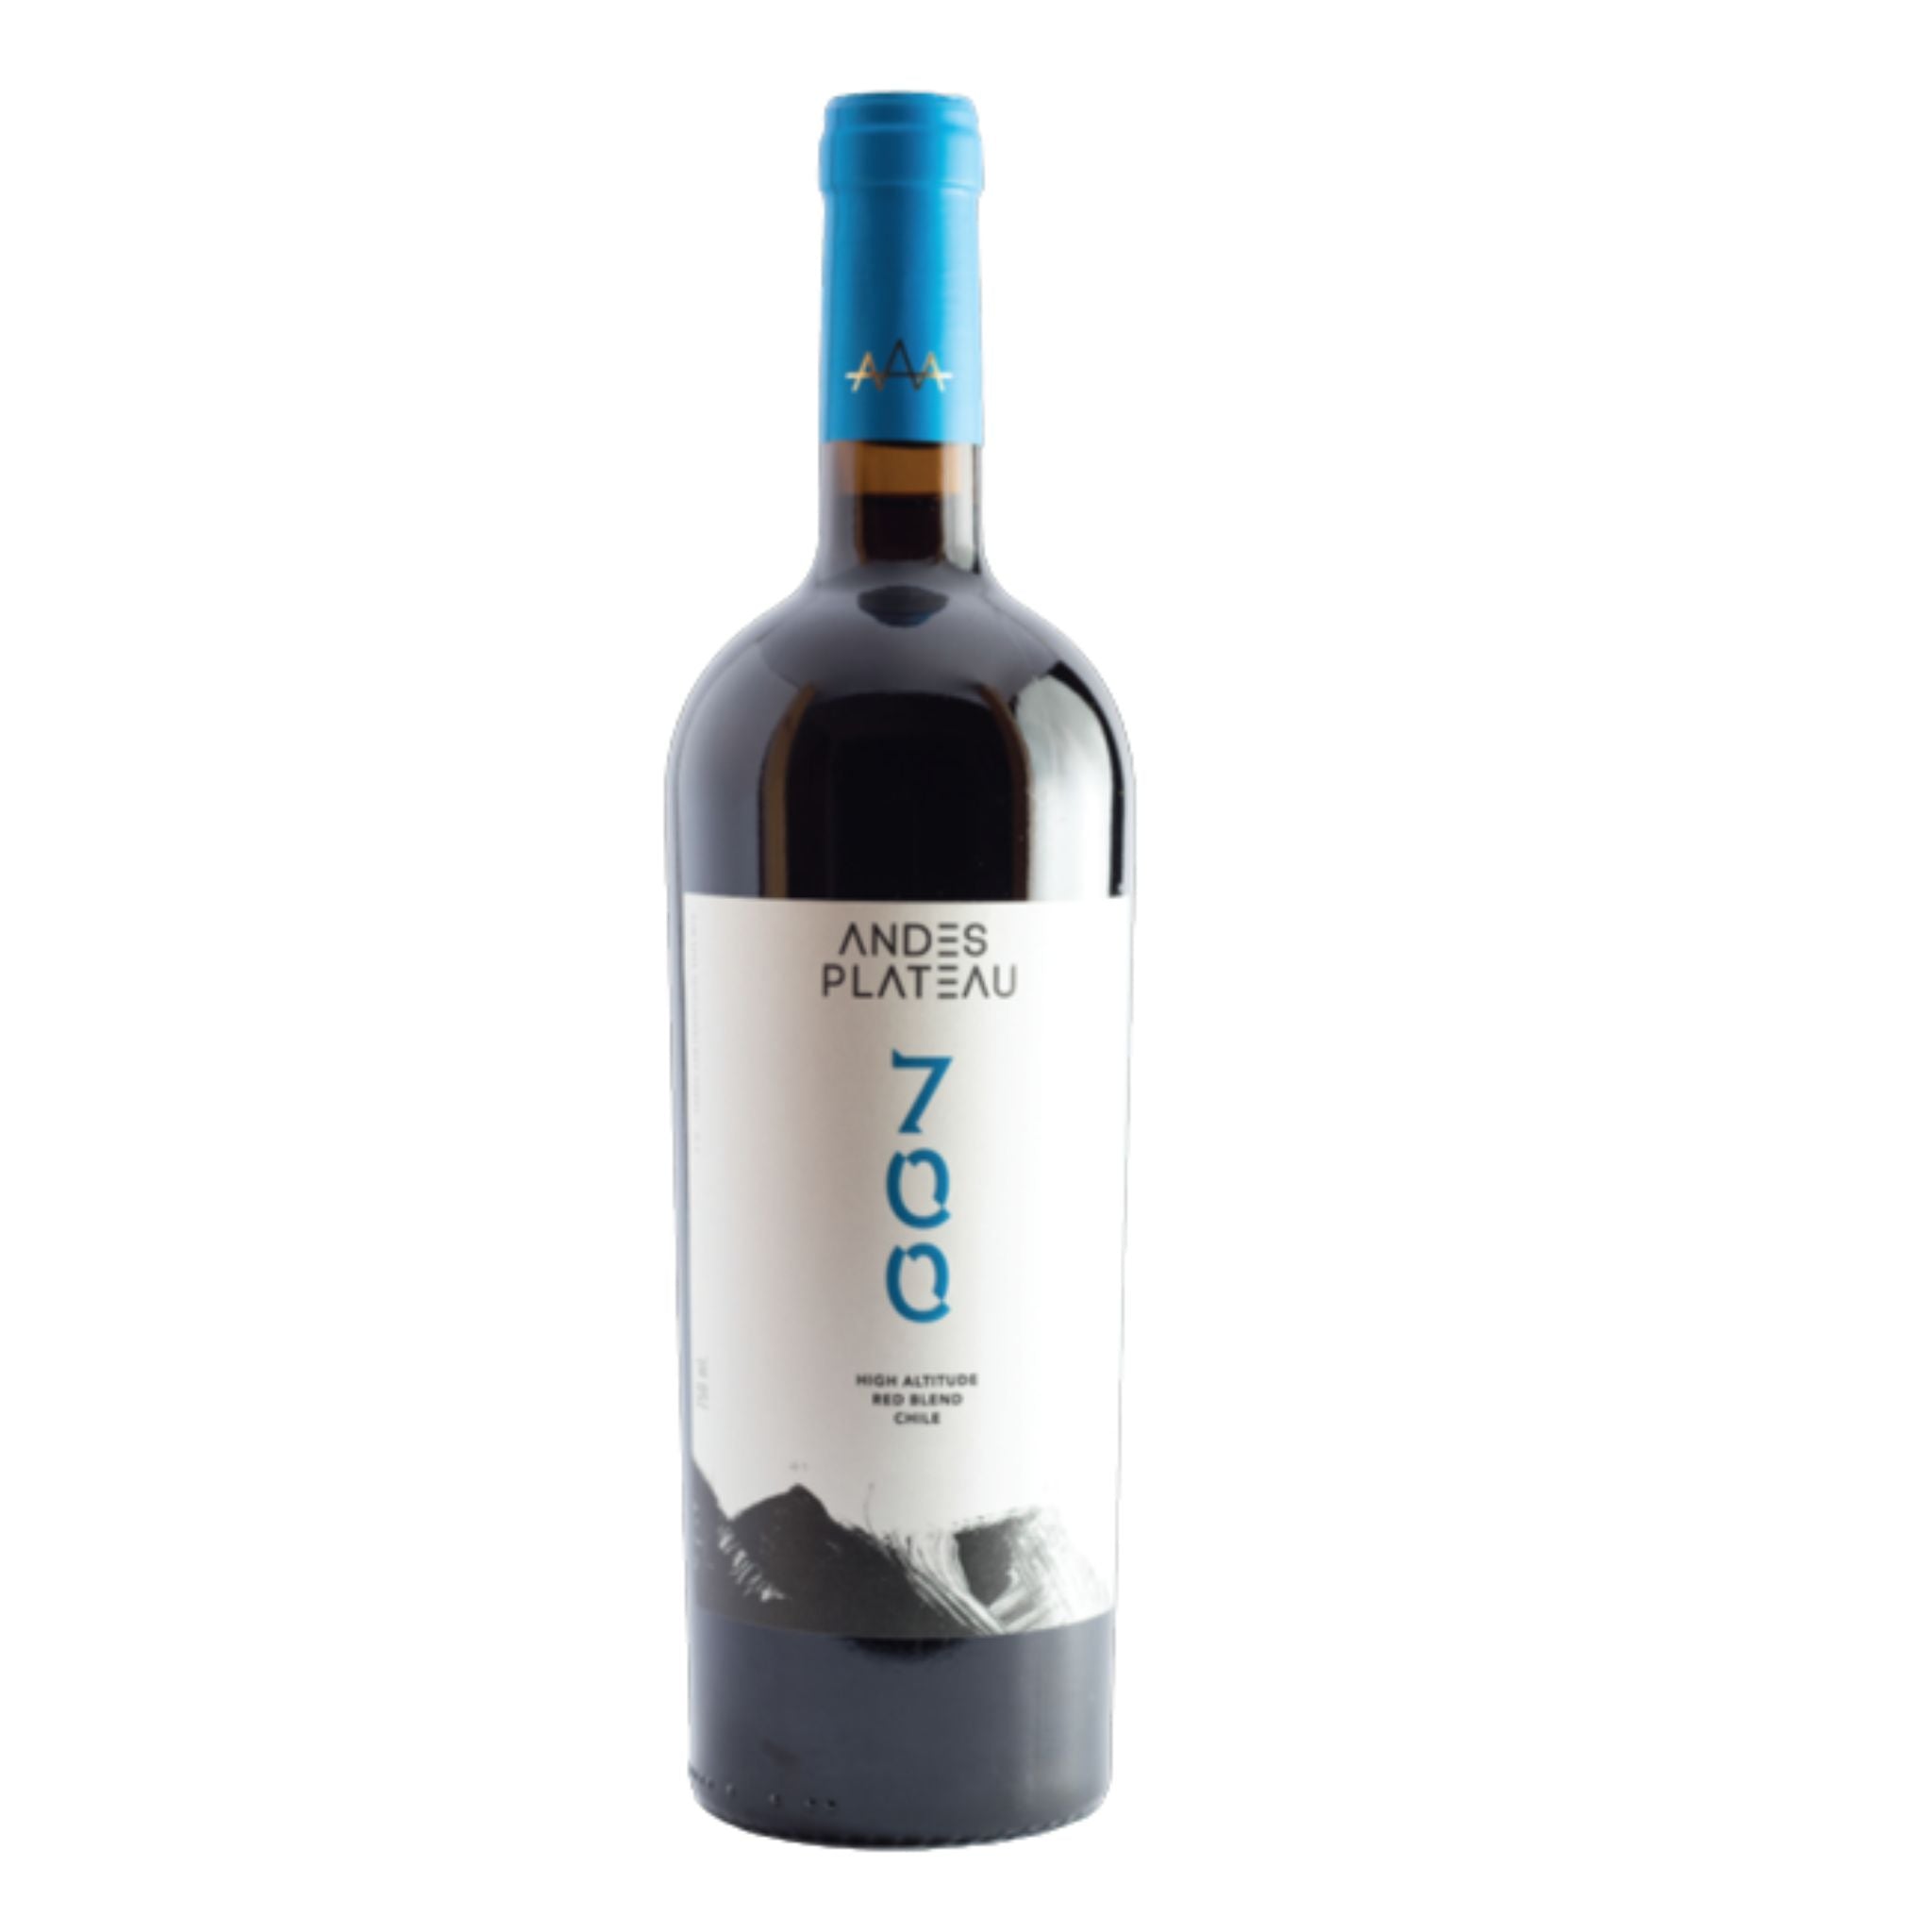 VINO TINTO ANDES PLATEAU 700 RED BLEND 750ML